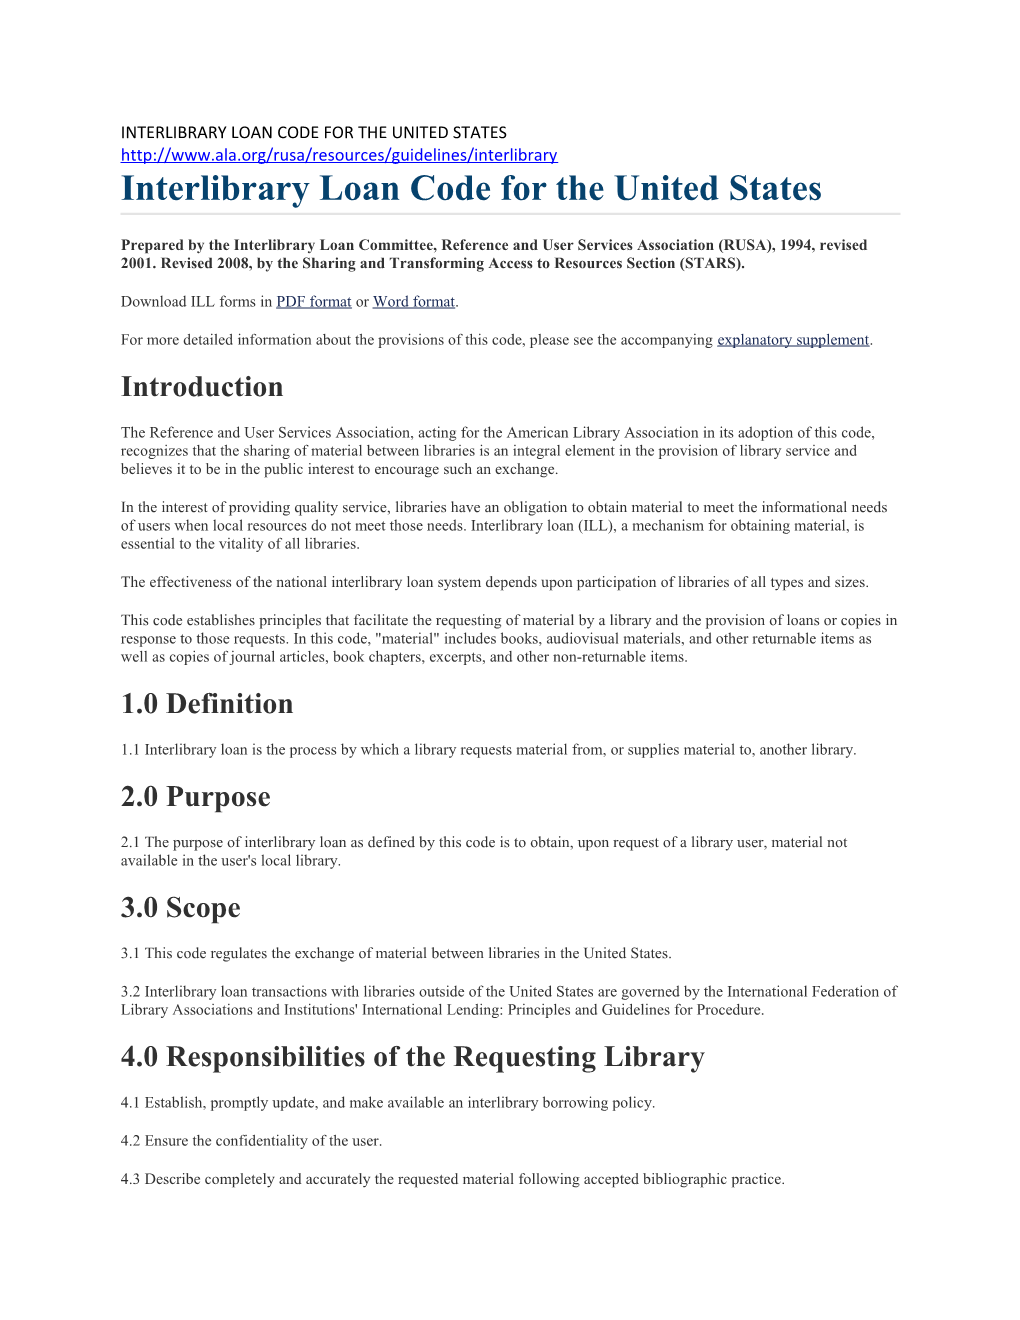 Interlibrary Loan Code for the United States